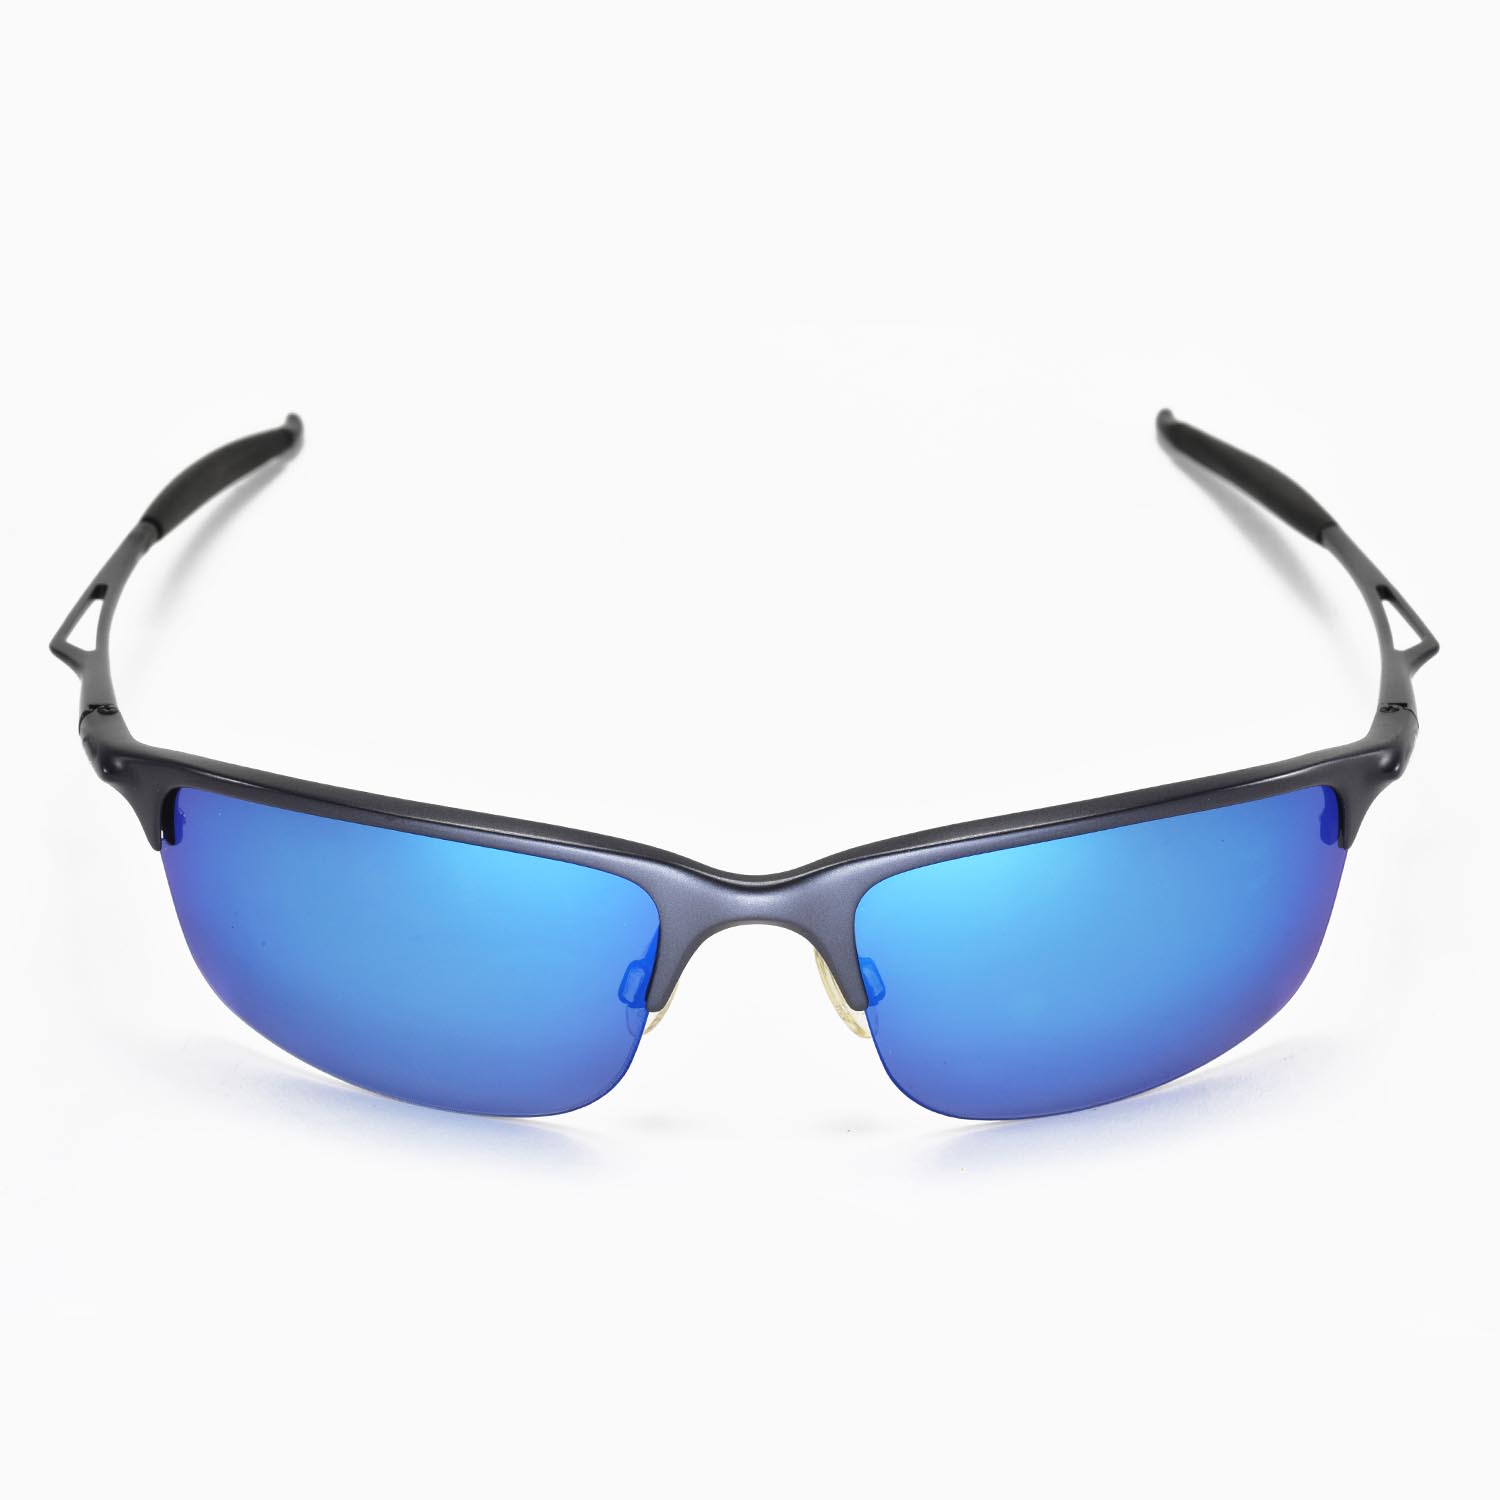 Walleva Ice Blue Polarized Replacement Lenses for Oakley Half Wire 2.0 Sunglasses - image 5 of 6